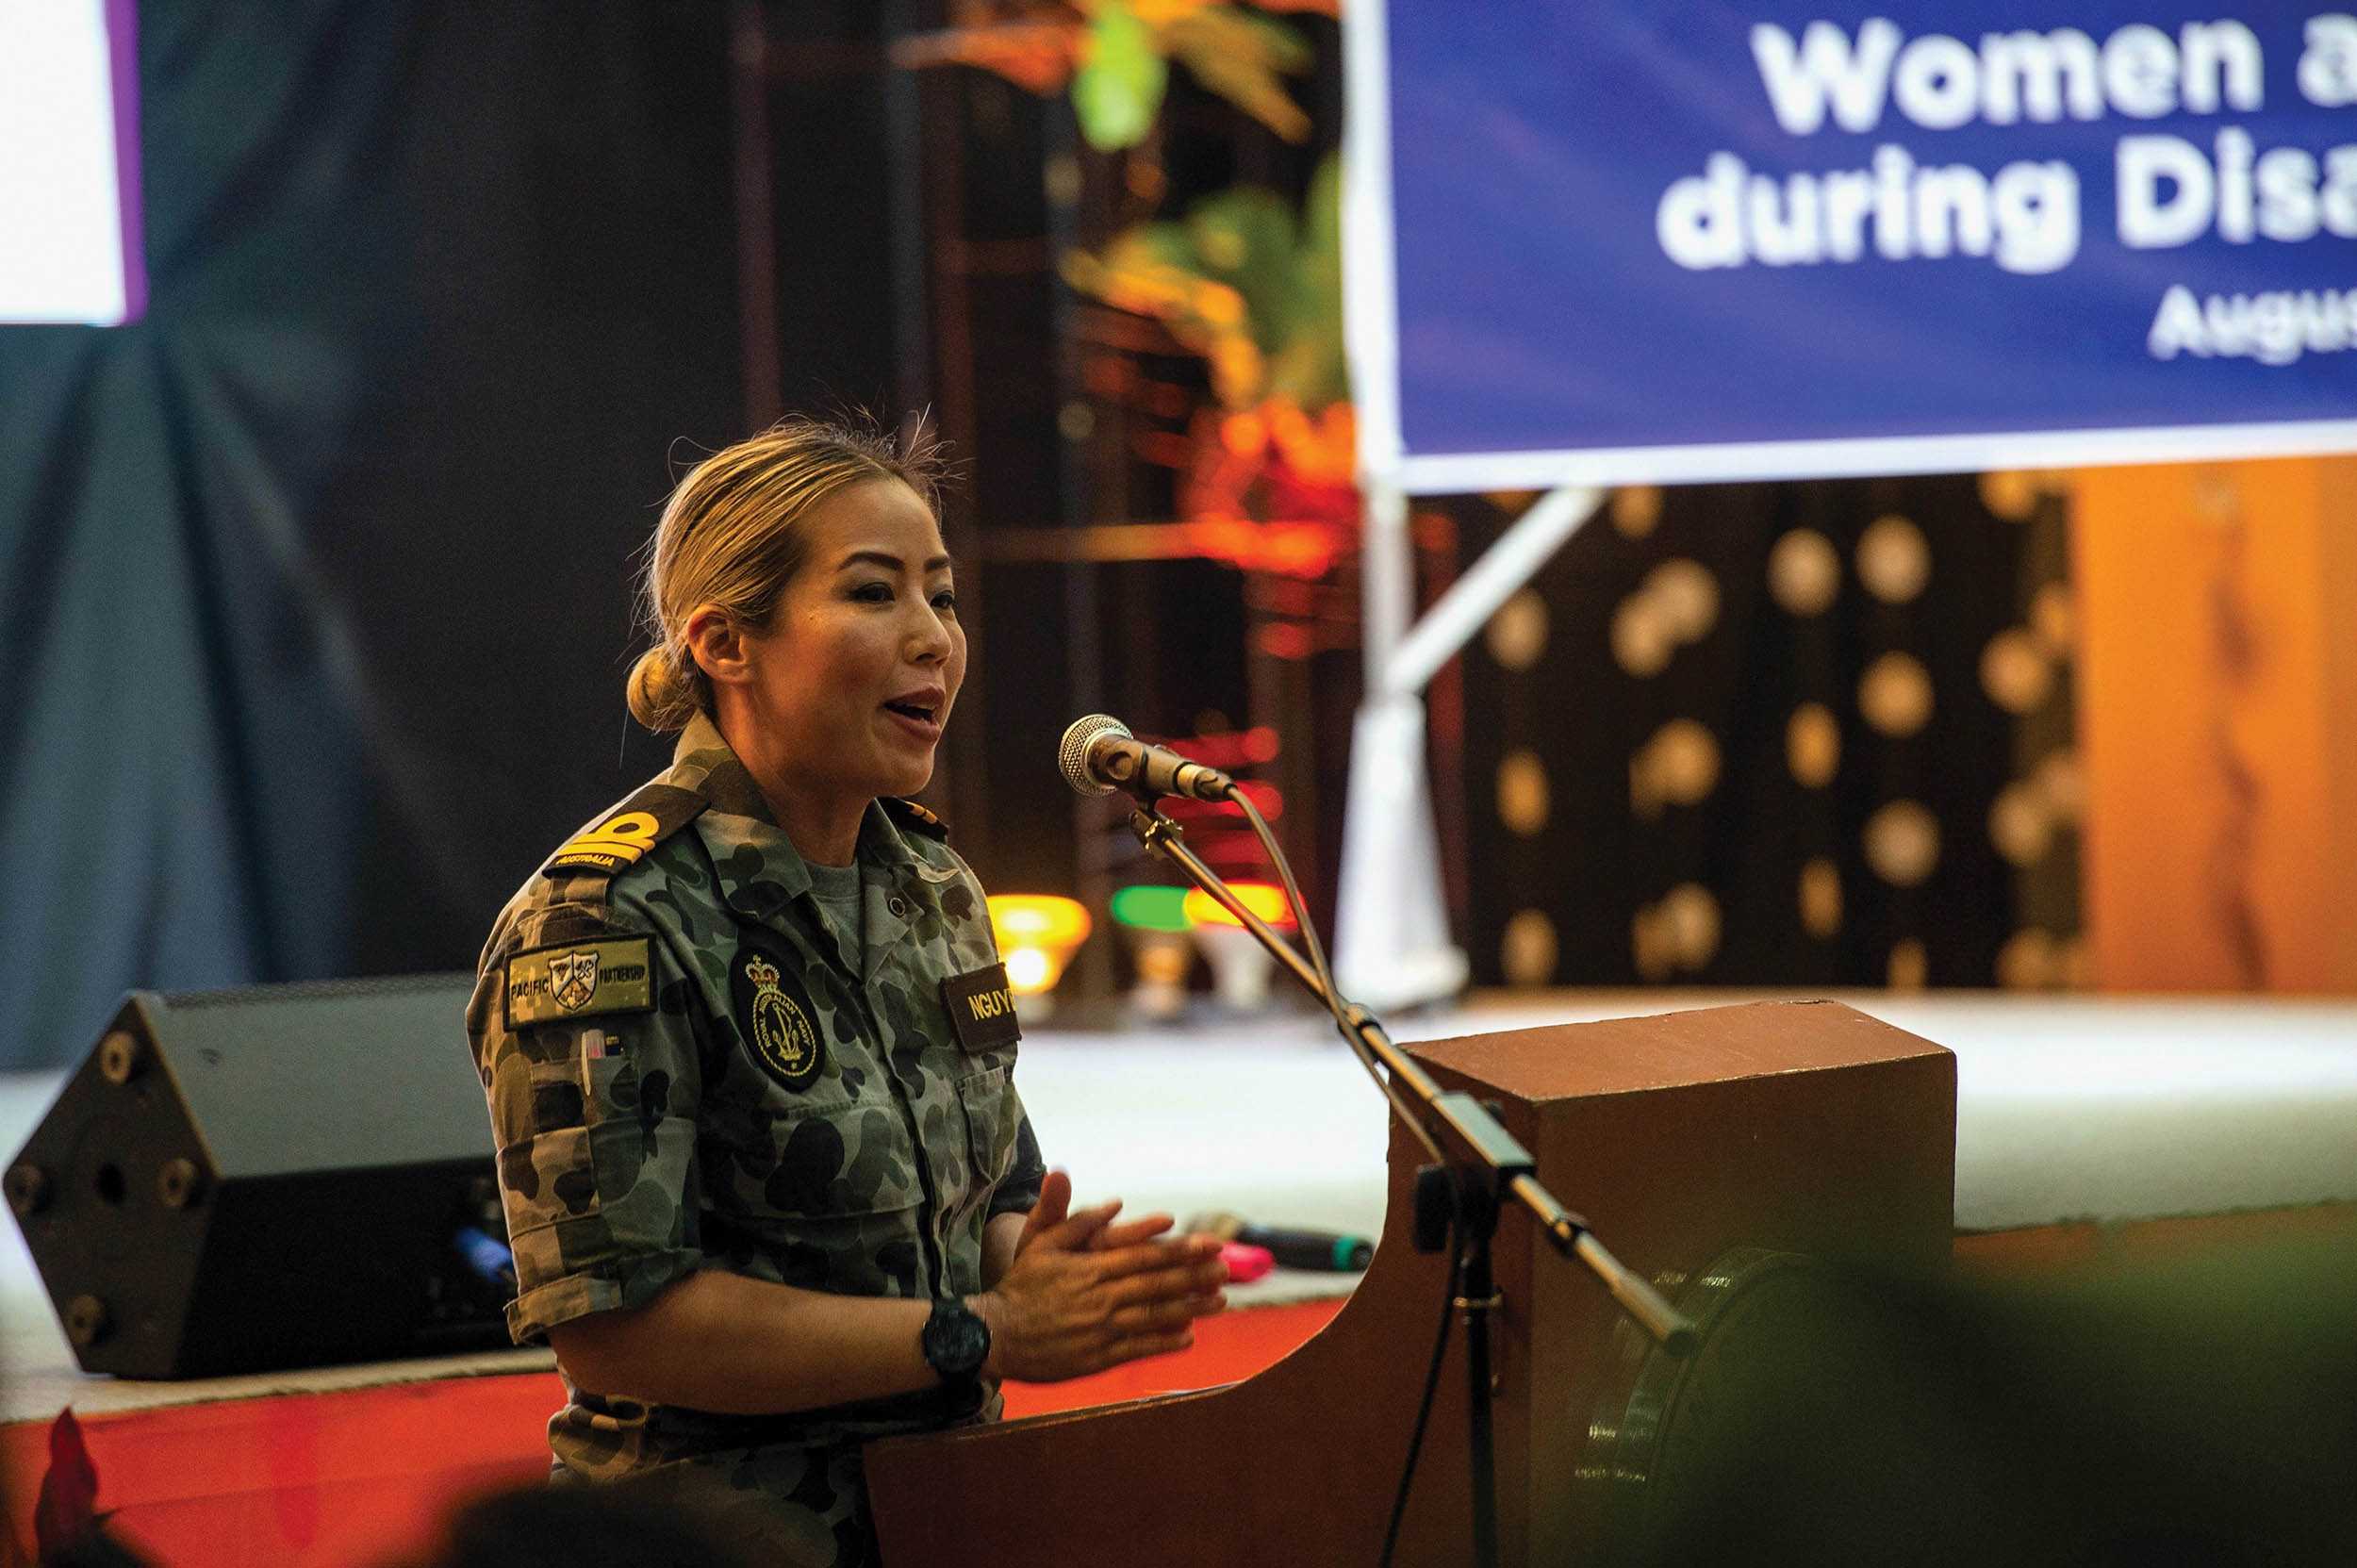 Lieutenant Vicky Nguyen, Gender, Peace, and Security advisor with Royal Australian Navy, presents during “Women and Security during Disaster” lecture at Palawan State University, during Pacific Partnership 2022, Puerto Princesa, Philippines, August 12, 2022 (U.S. Navy/Jacob Woitzel)